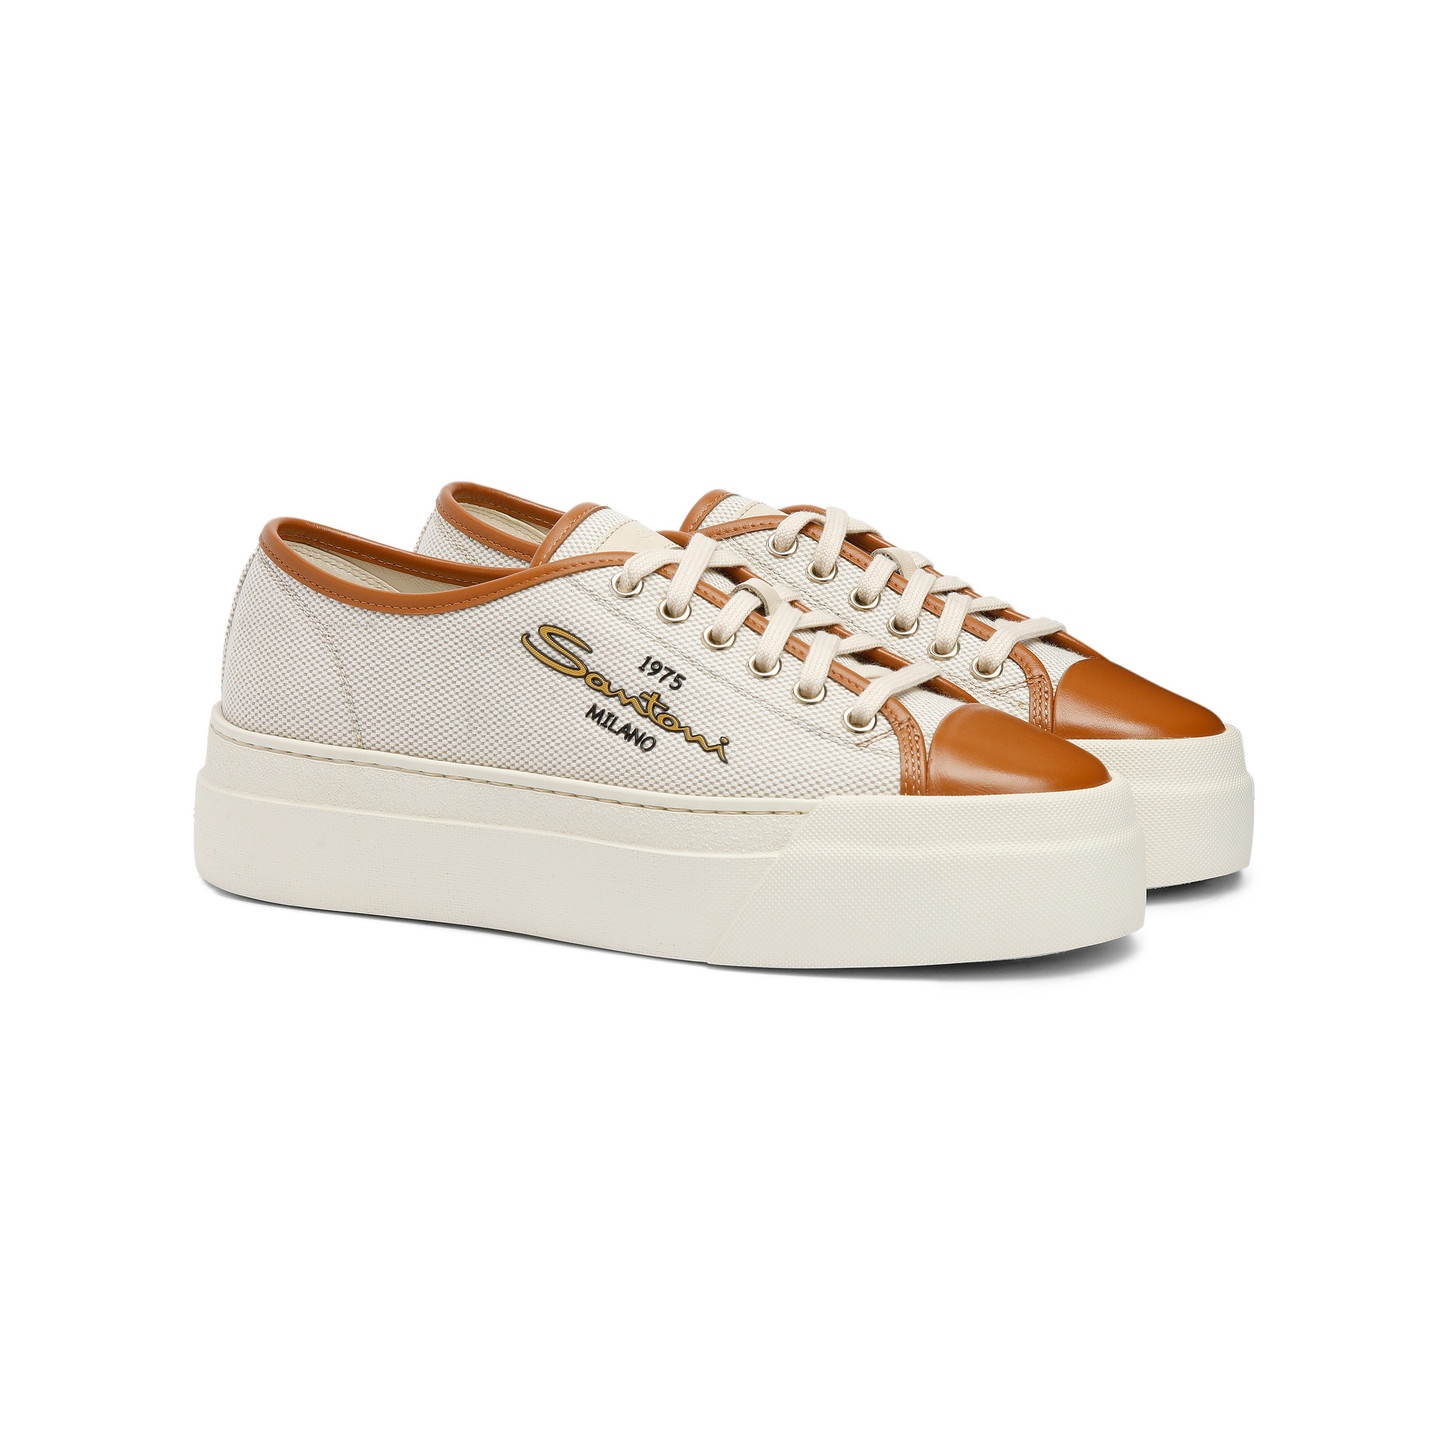 Women's brown canvas and leather platform sneaker - 3